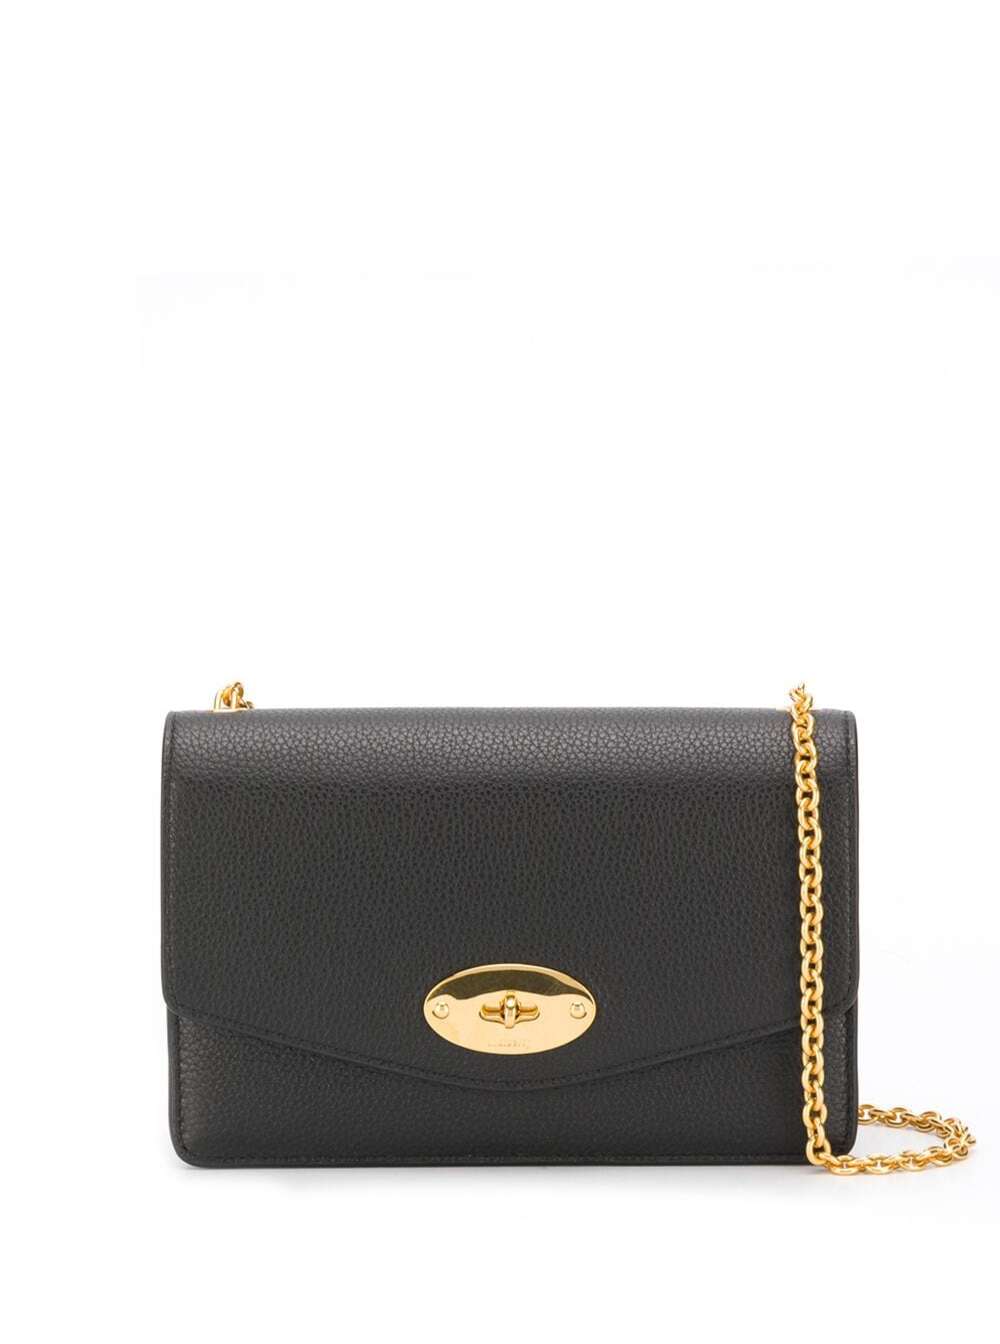 Mulberry Small Darley Black Shoulder Bag With Twist Closure In Grainy Leather Woman